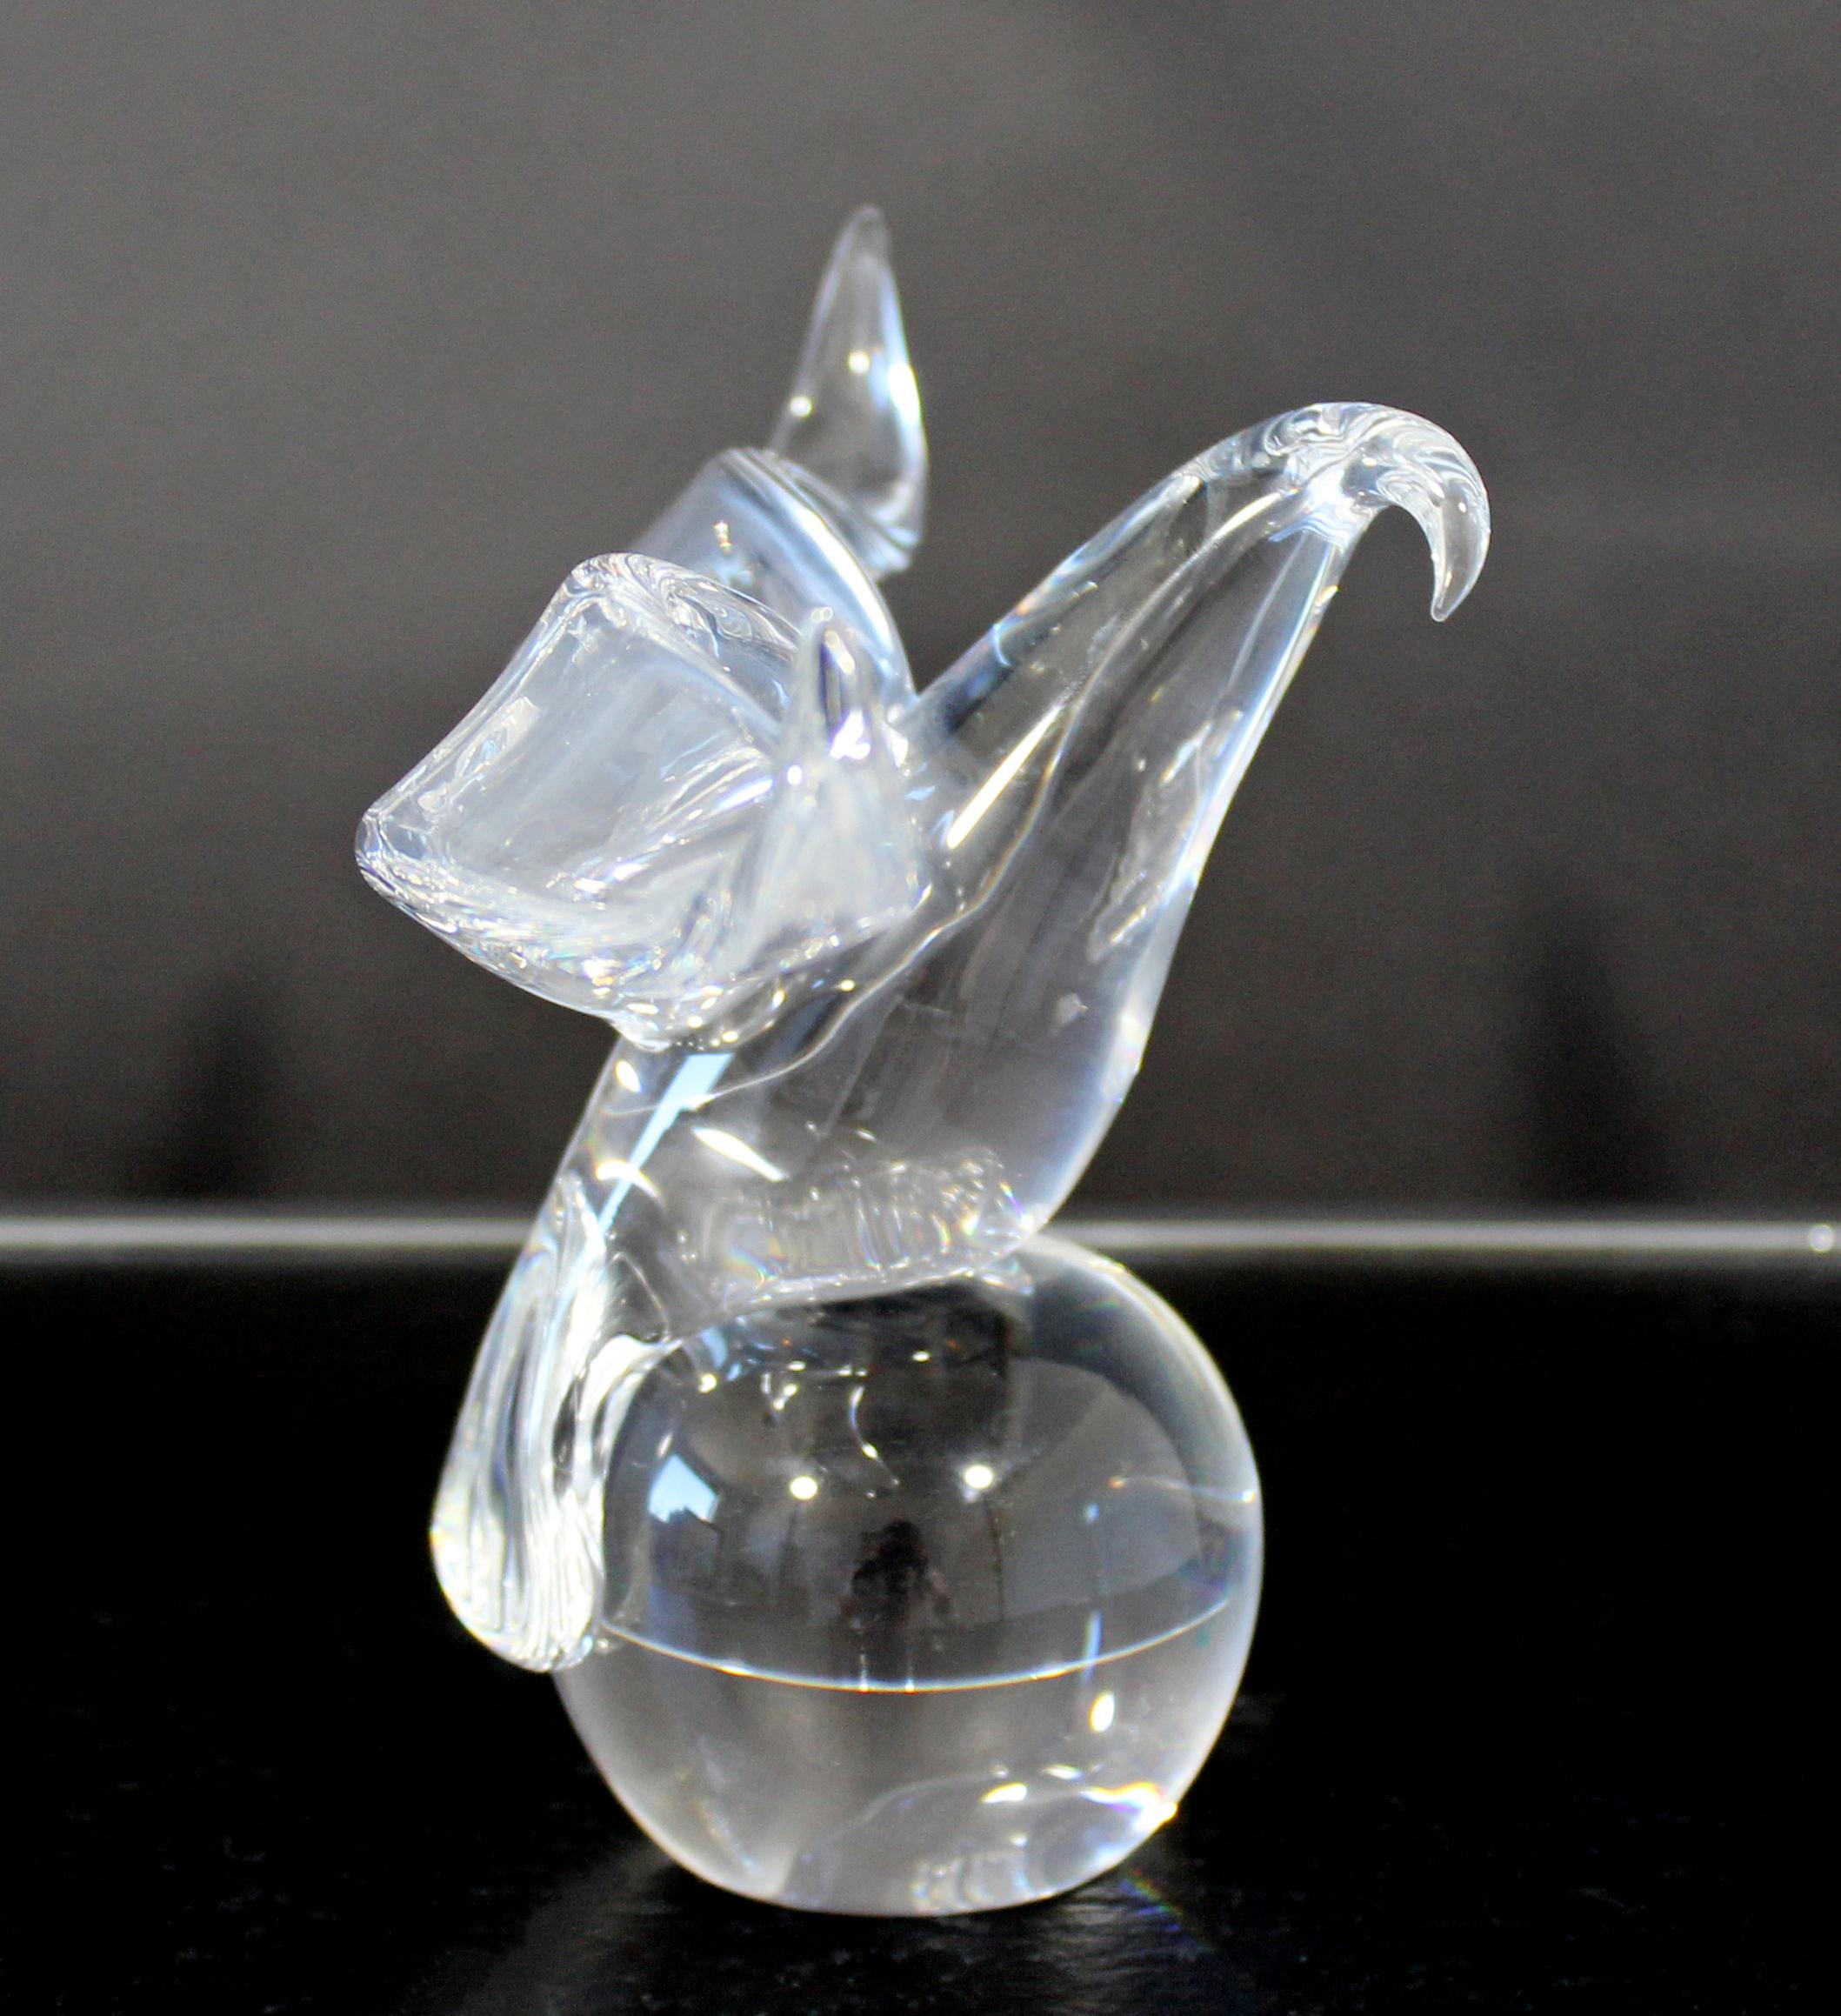 Late 20th Century Contemporary Steuben Signed Eagle on Ball Statuette Glass Table Sculpture